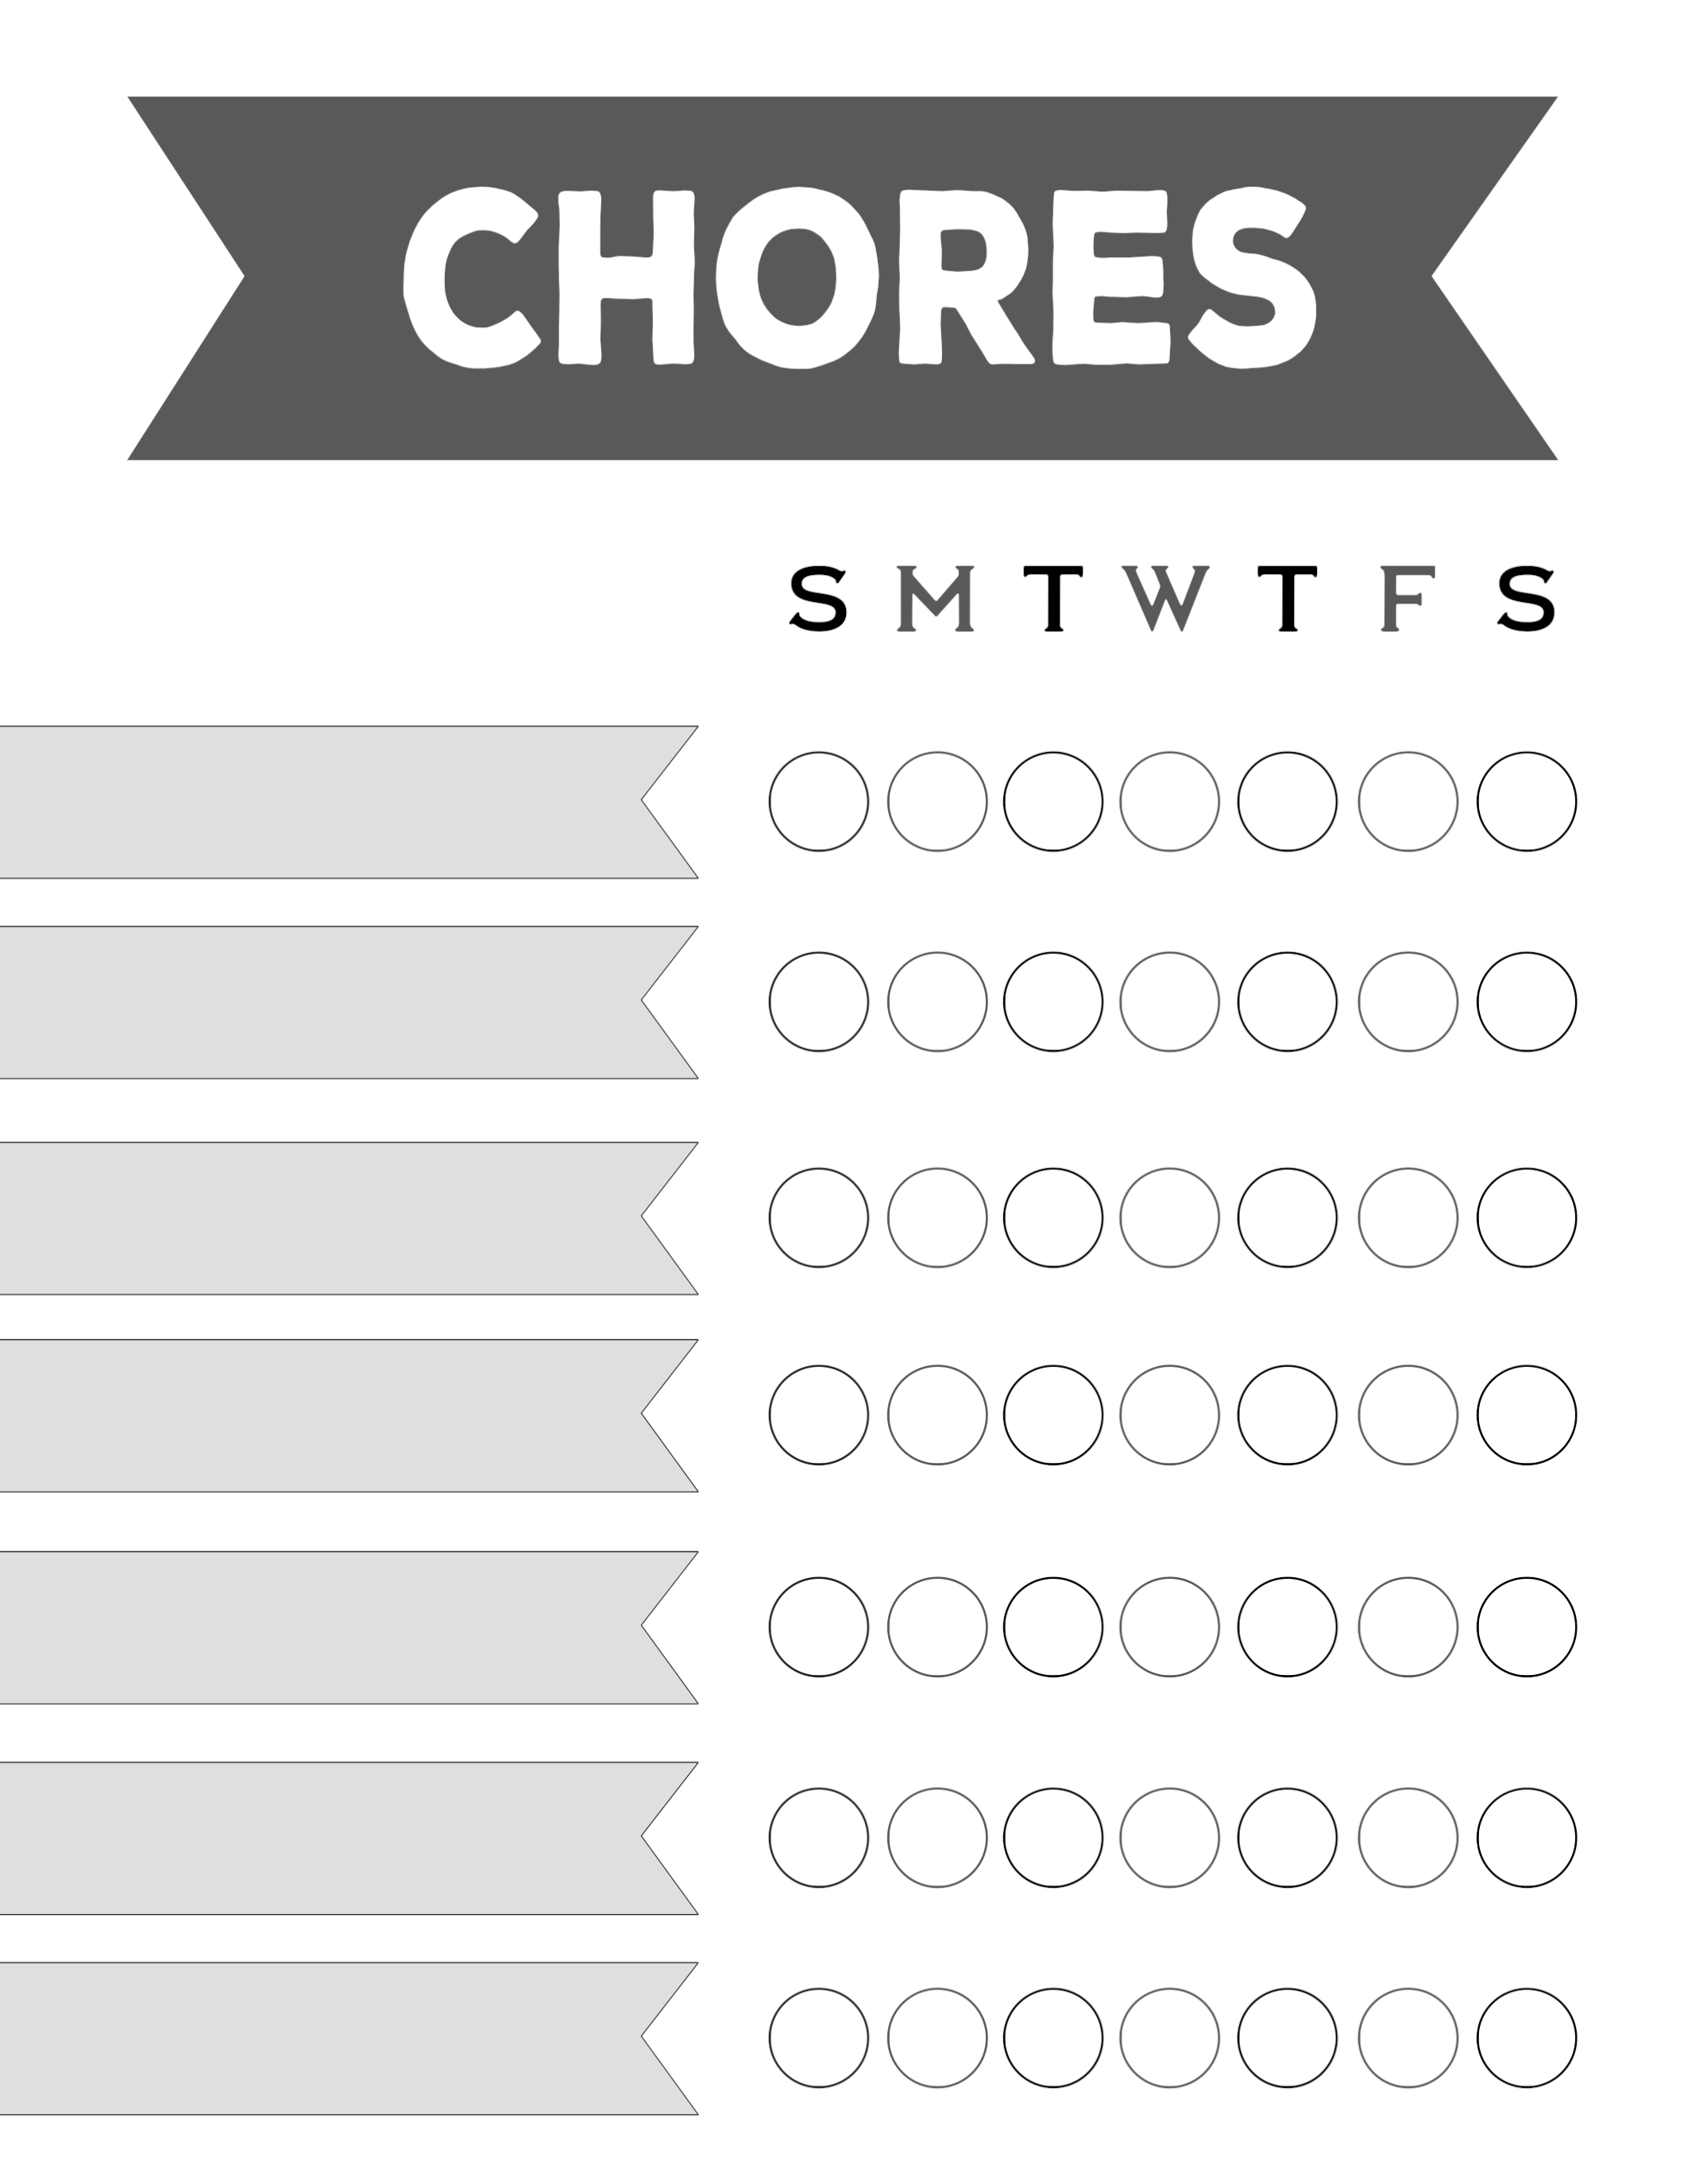 Free Chore Chart Template from www.papertraildesign.com